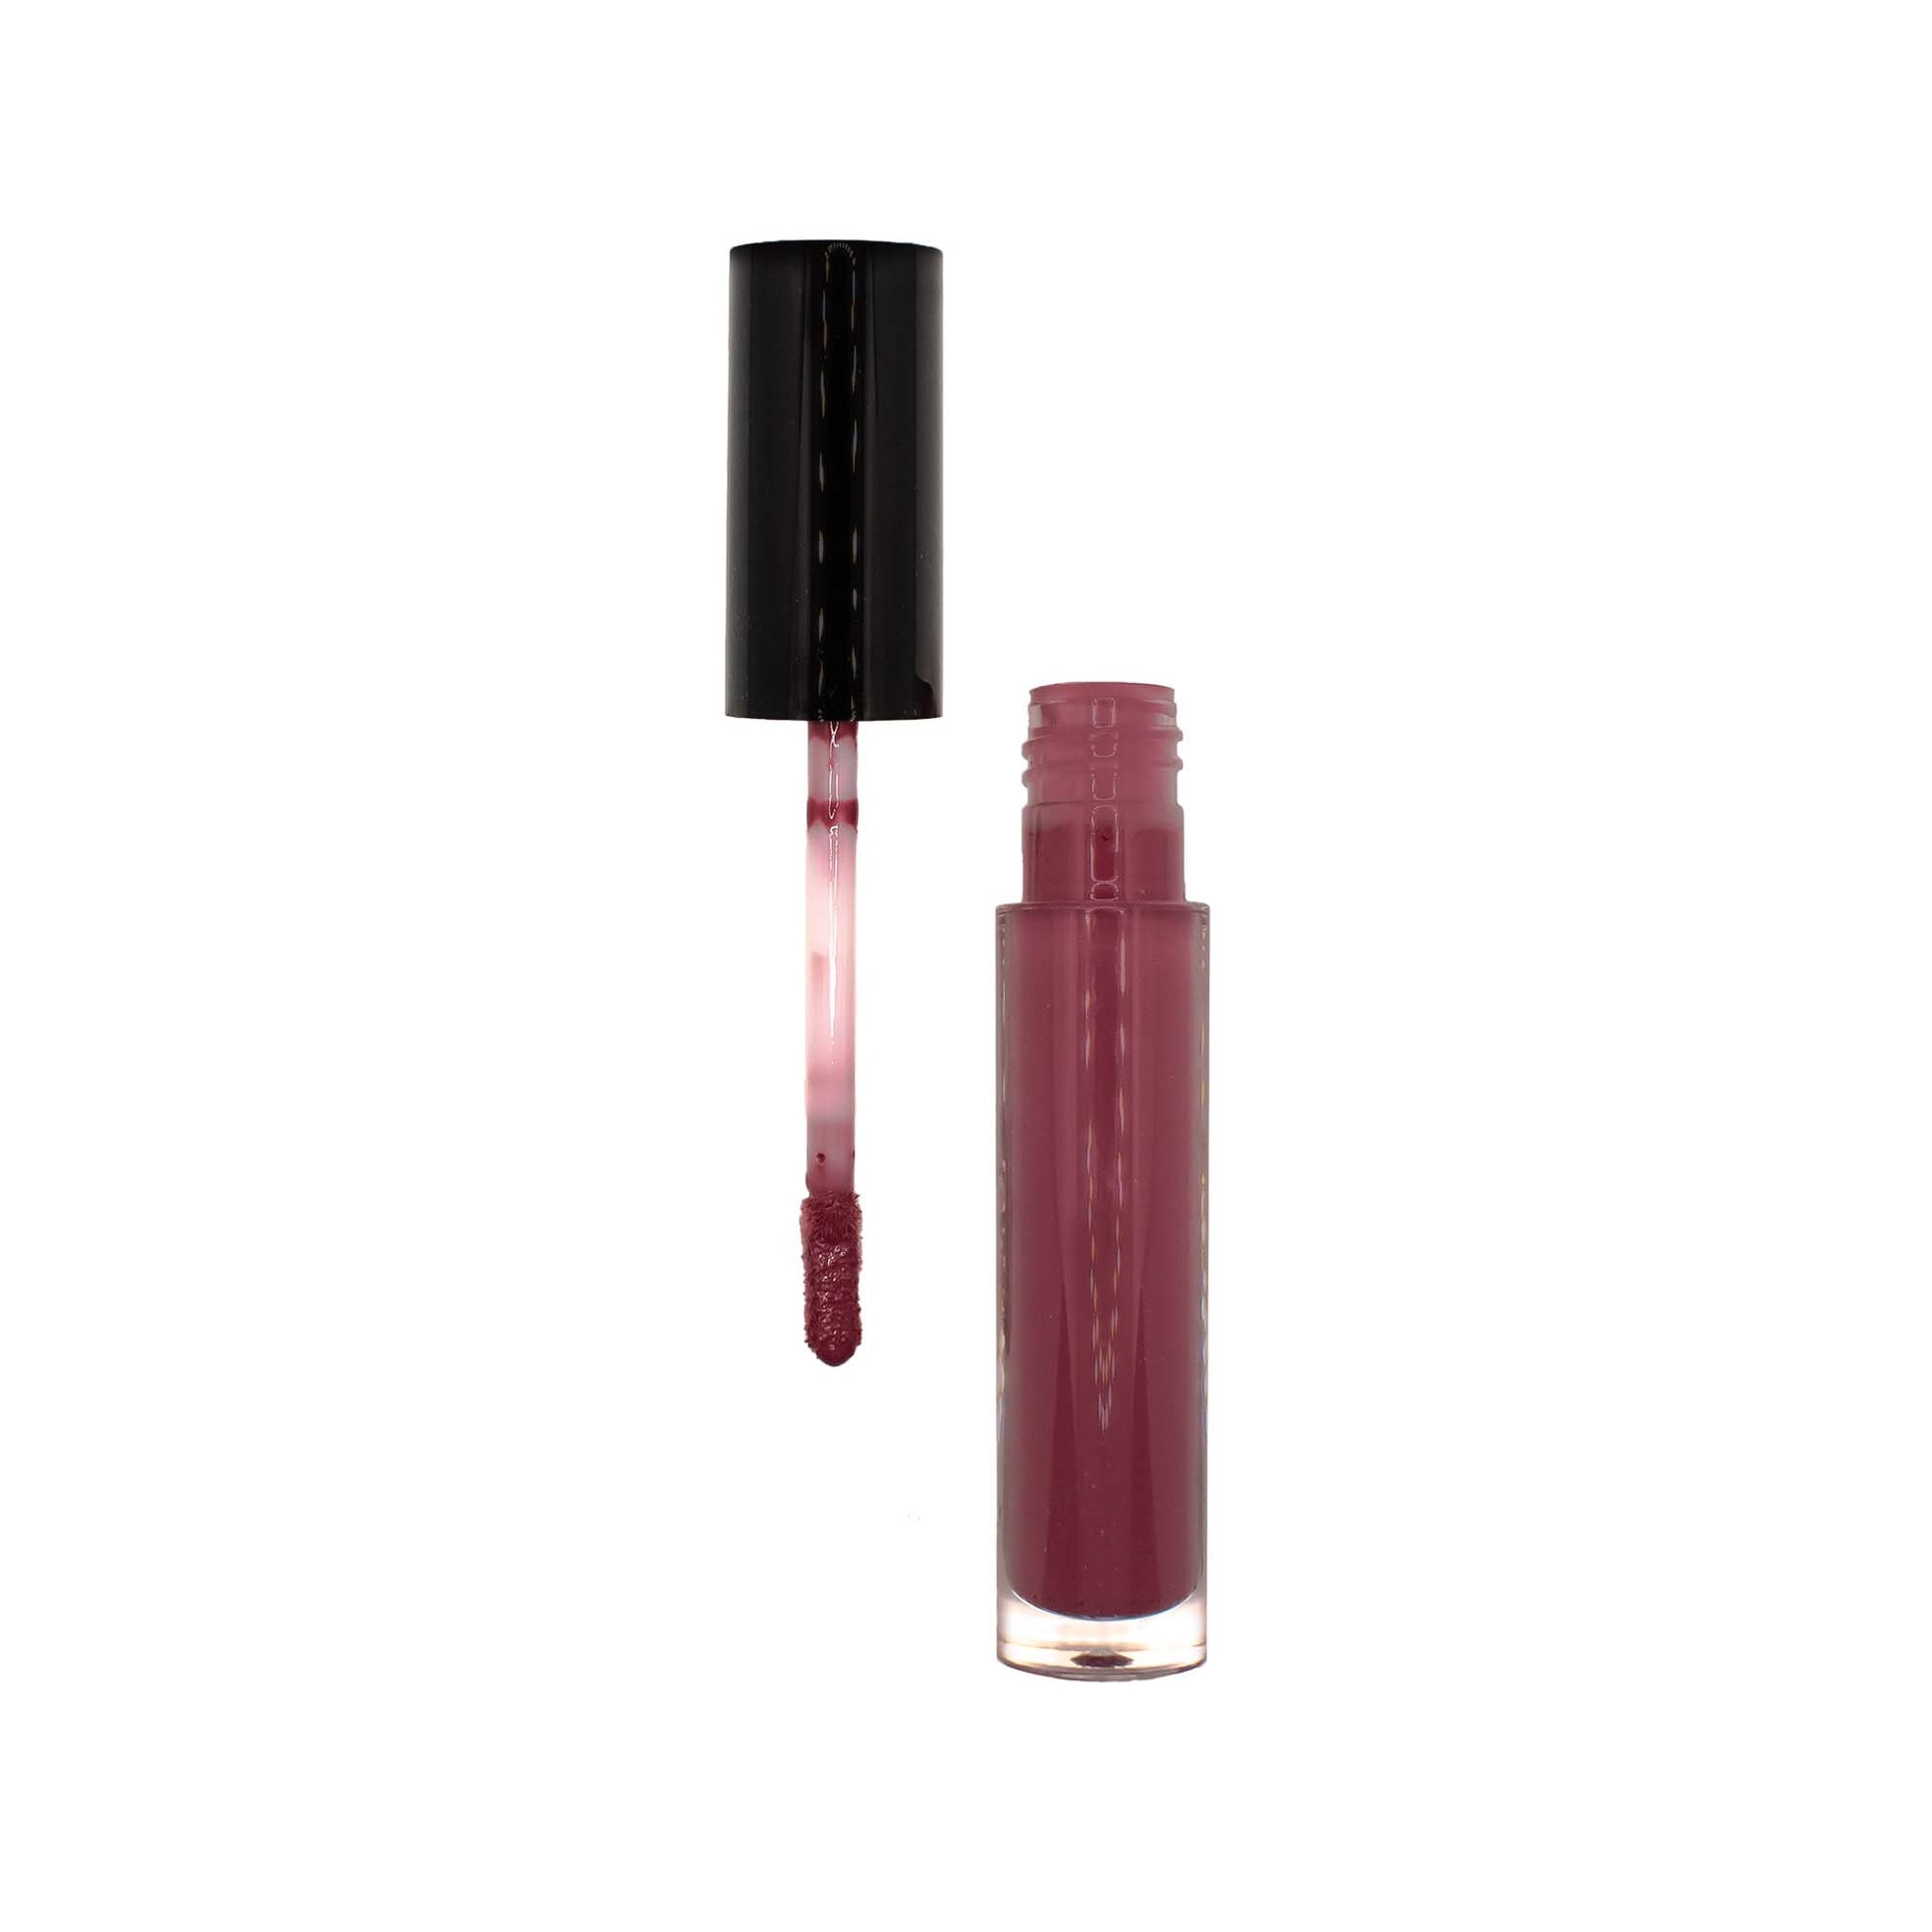 Cruisin Organics Lavender Lip gloss will be gorgeous with our lip liners.